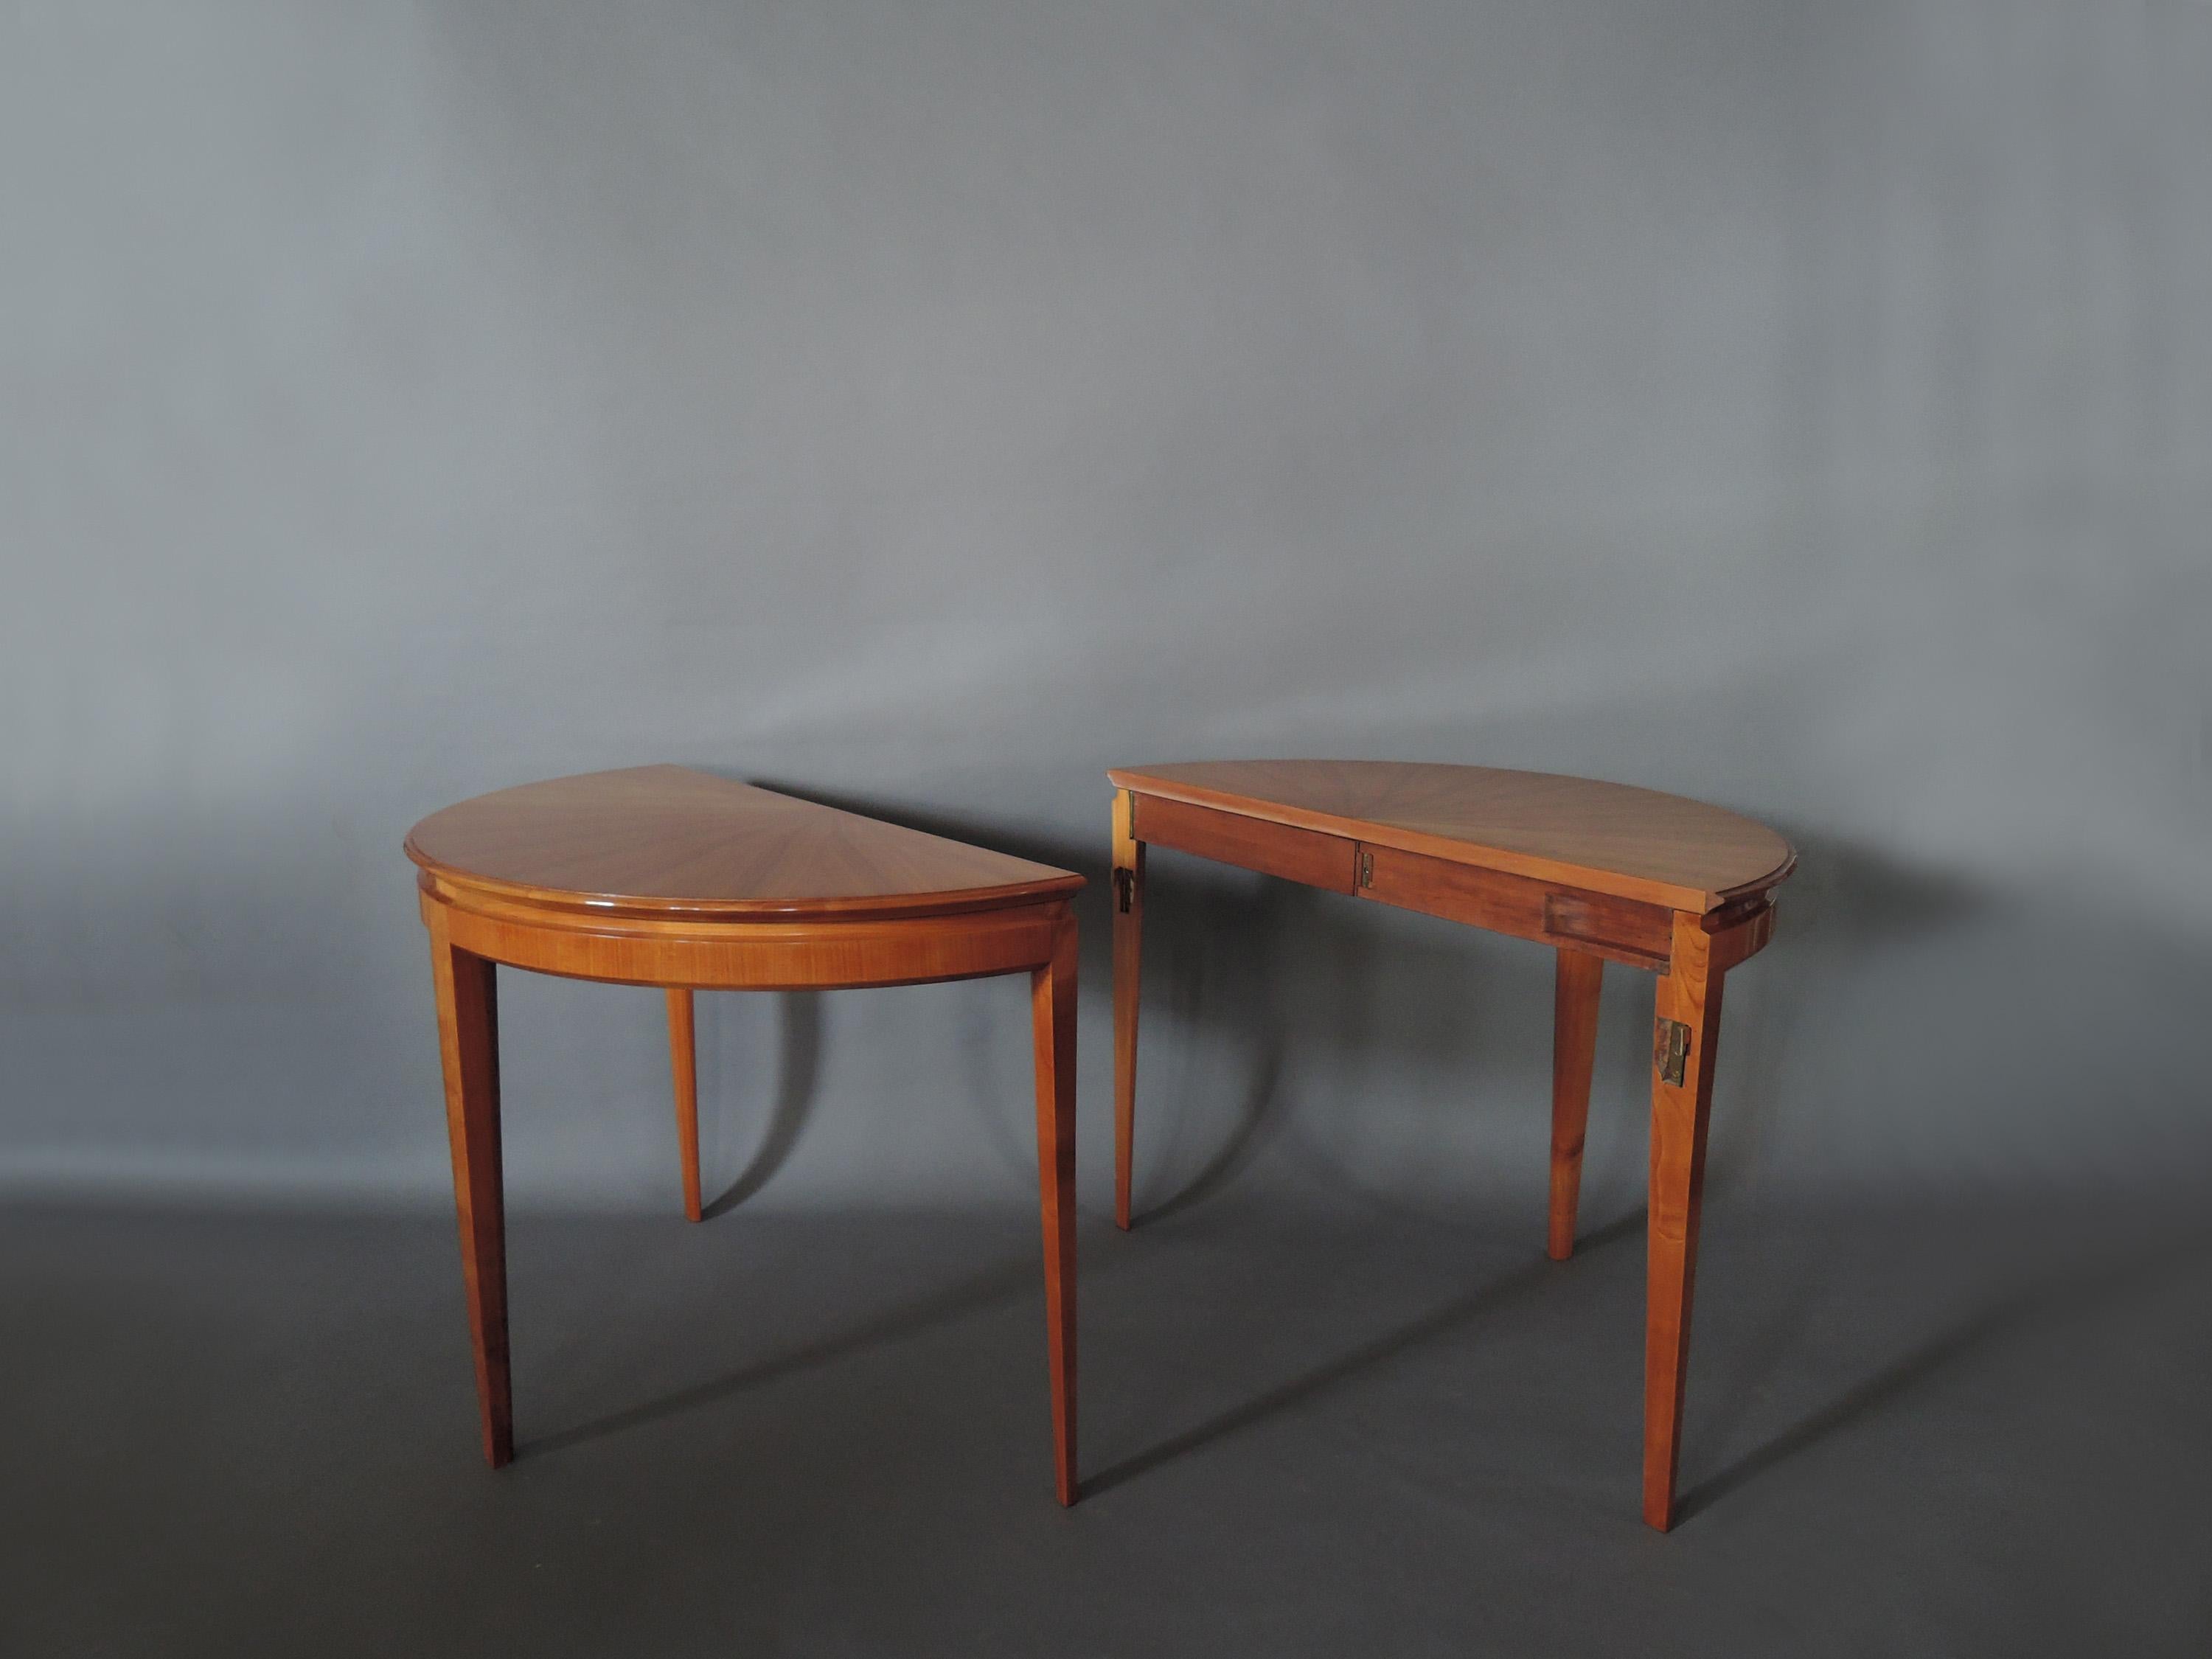 Mid-Century Modern French 1950s Cherry Round Dining Table Divisible in 2 Demilune Tables For Sale